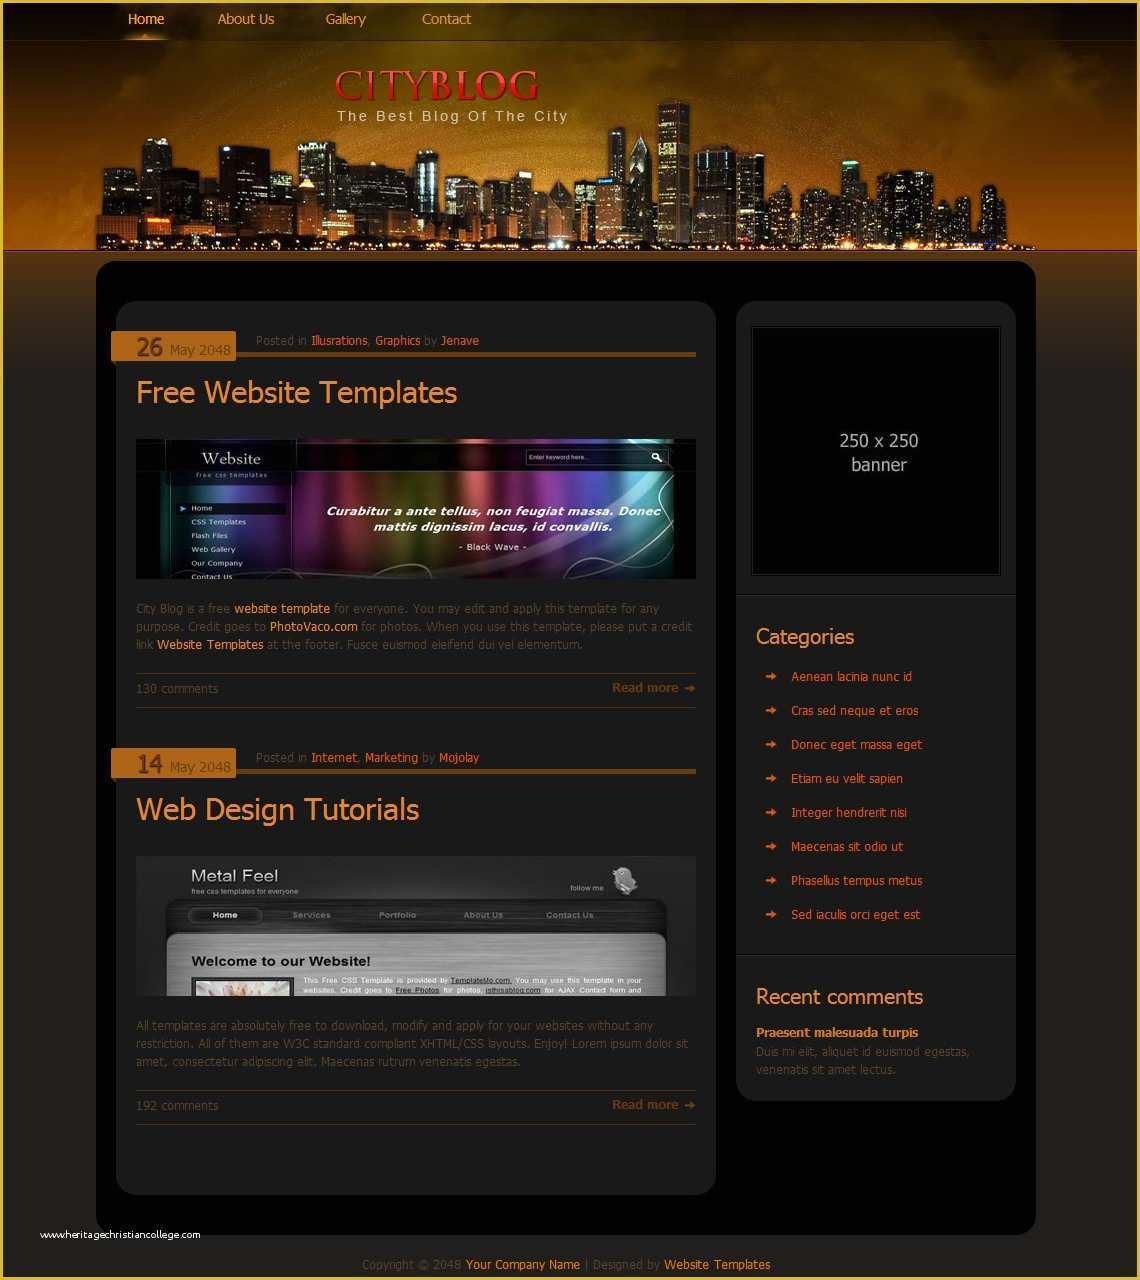 free-website-templates-download-html-and-css-and-javascript-of-city-blog-free-html-css-templates